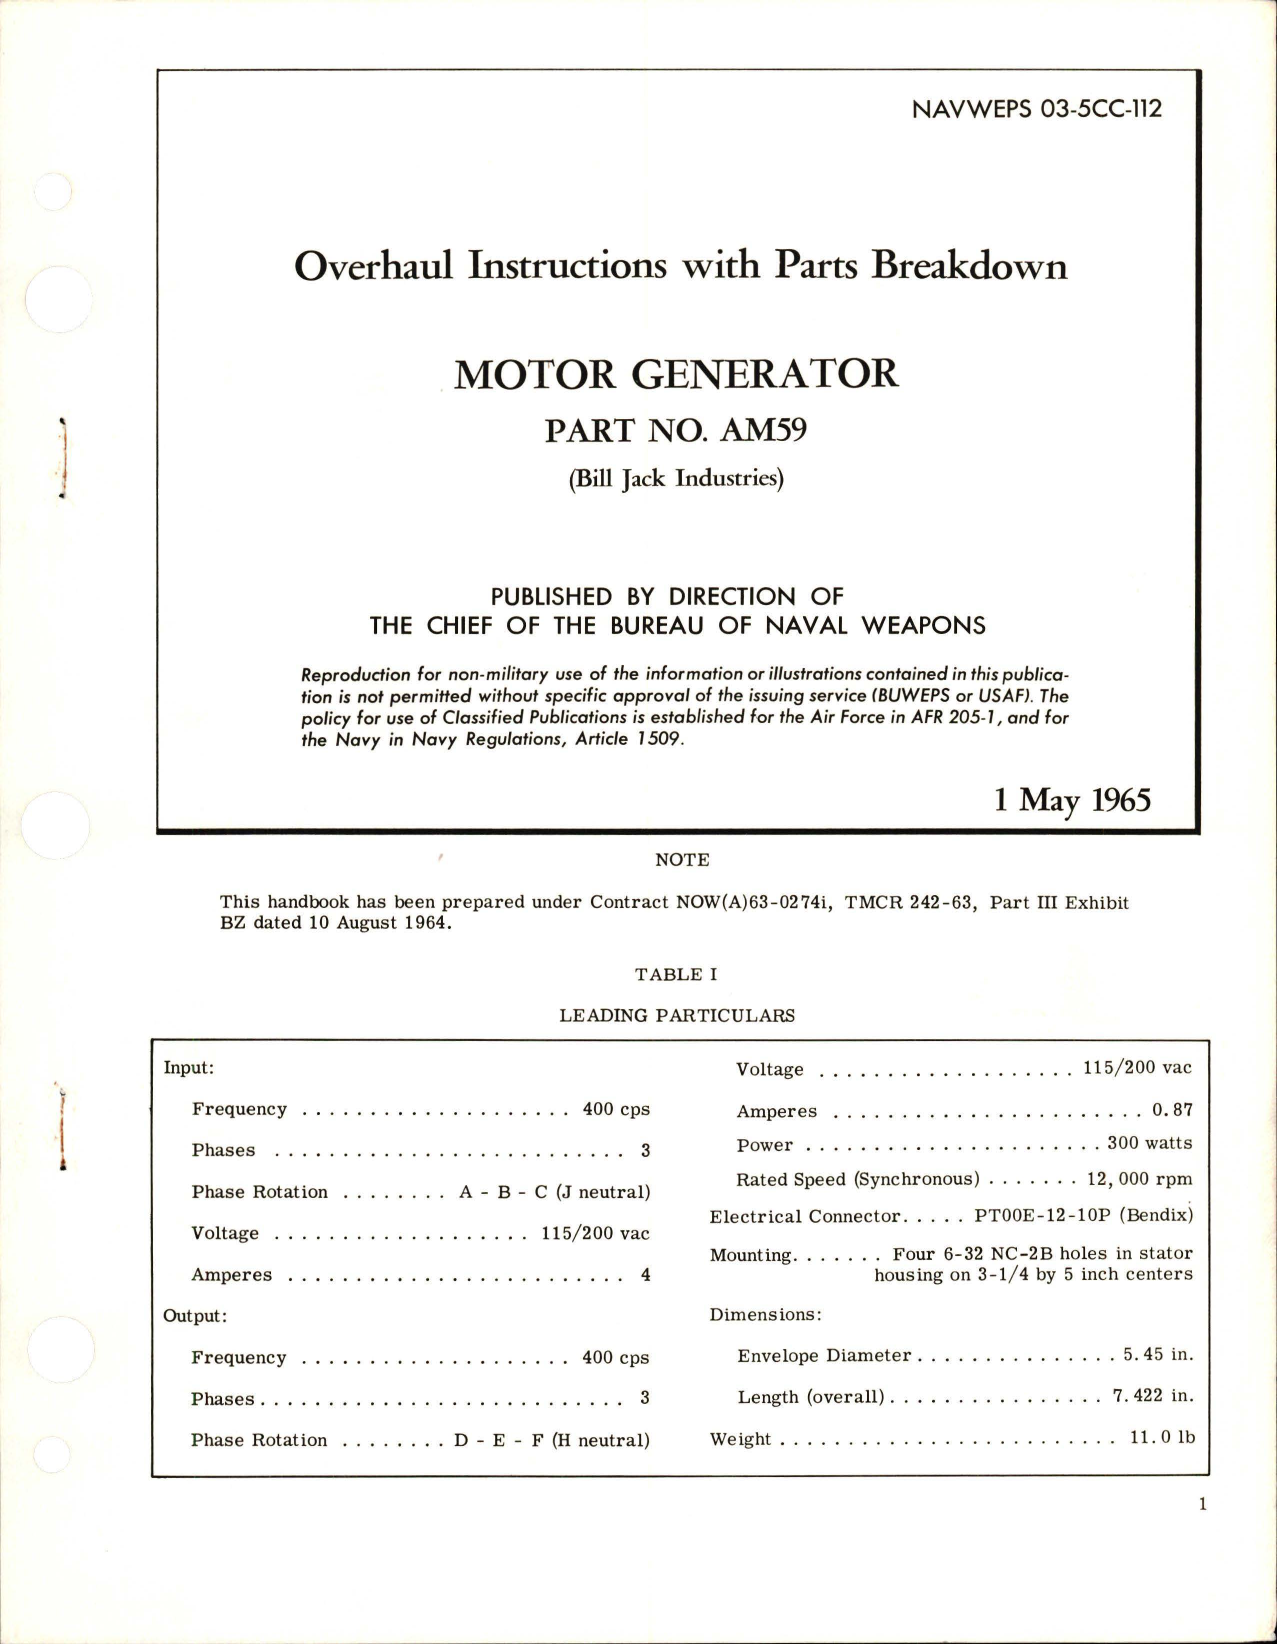 Sample page 1 from AirCorps Library document: Overhaul Instructions with Parts Breakdown for Motor Generator - Part AM59